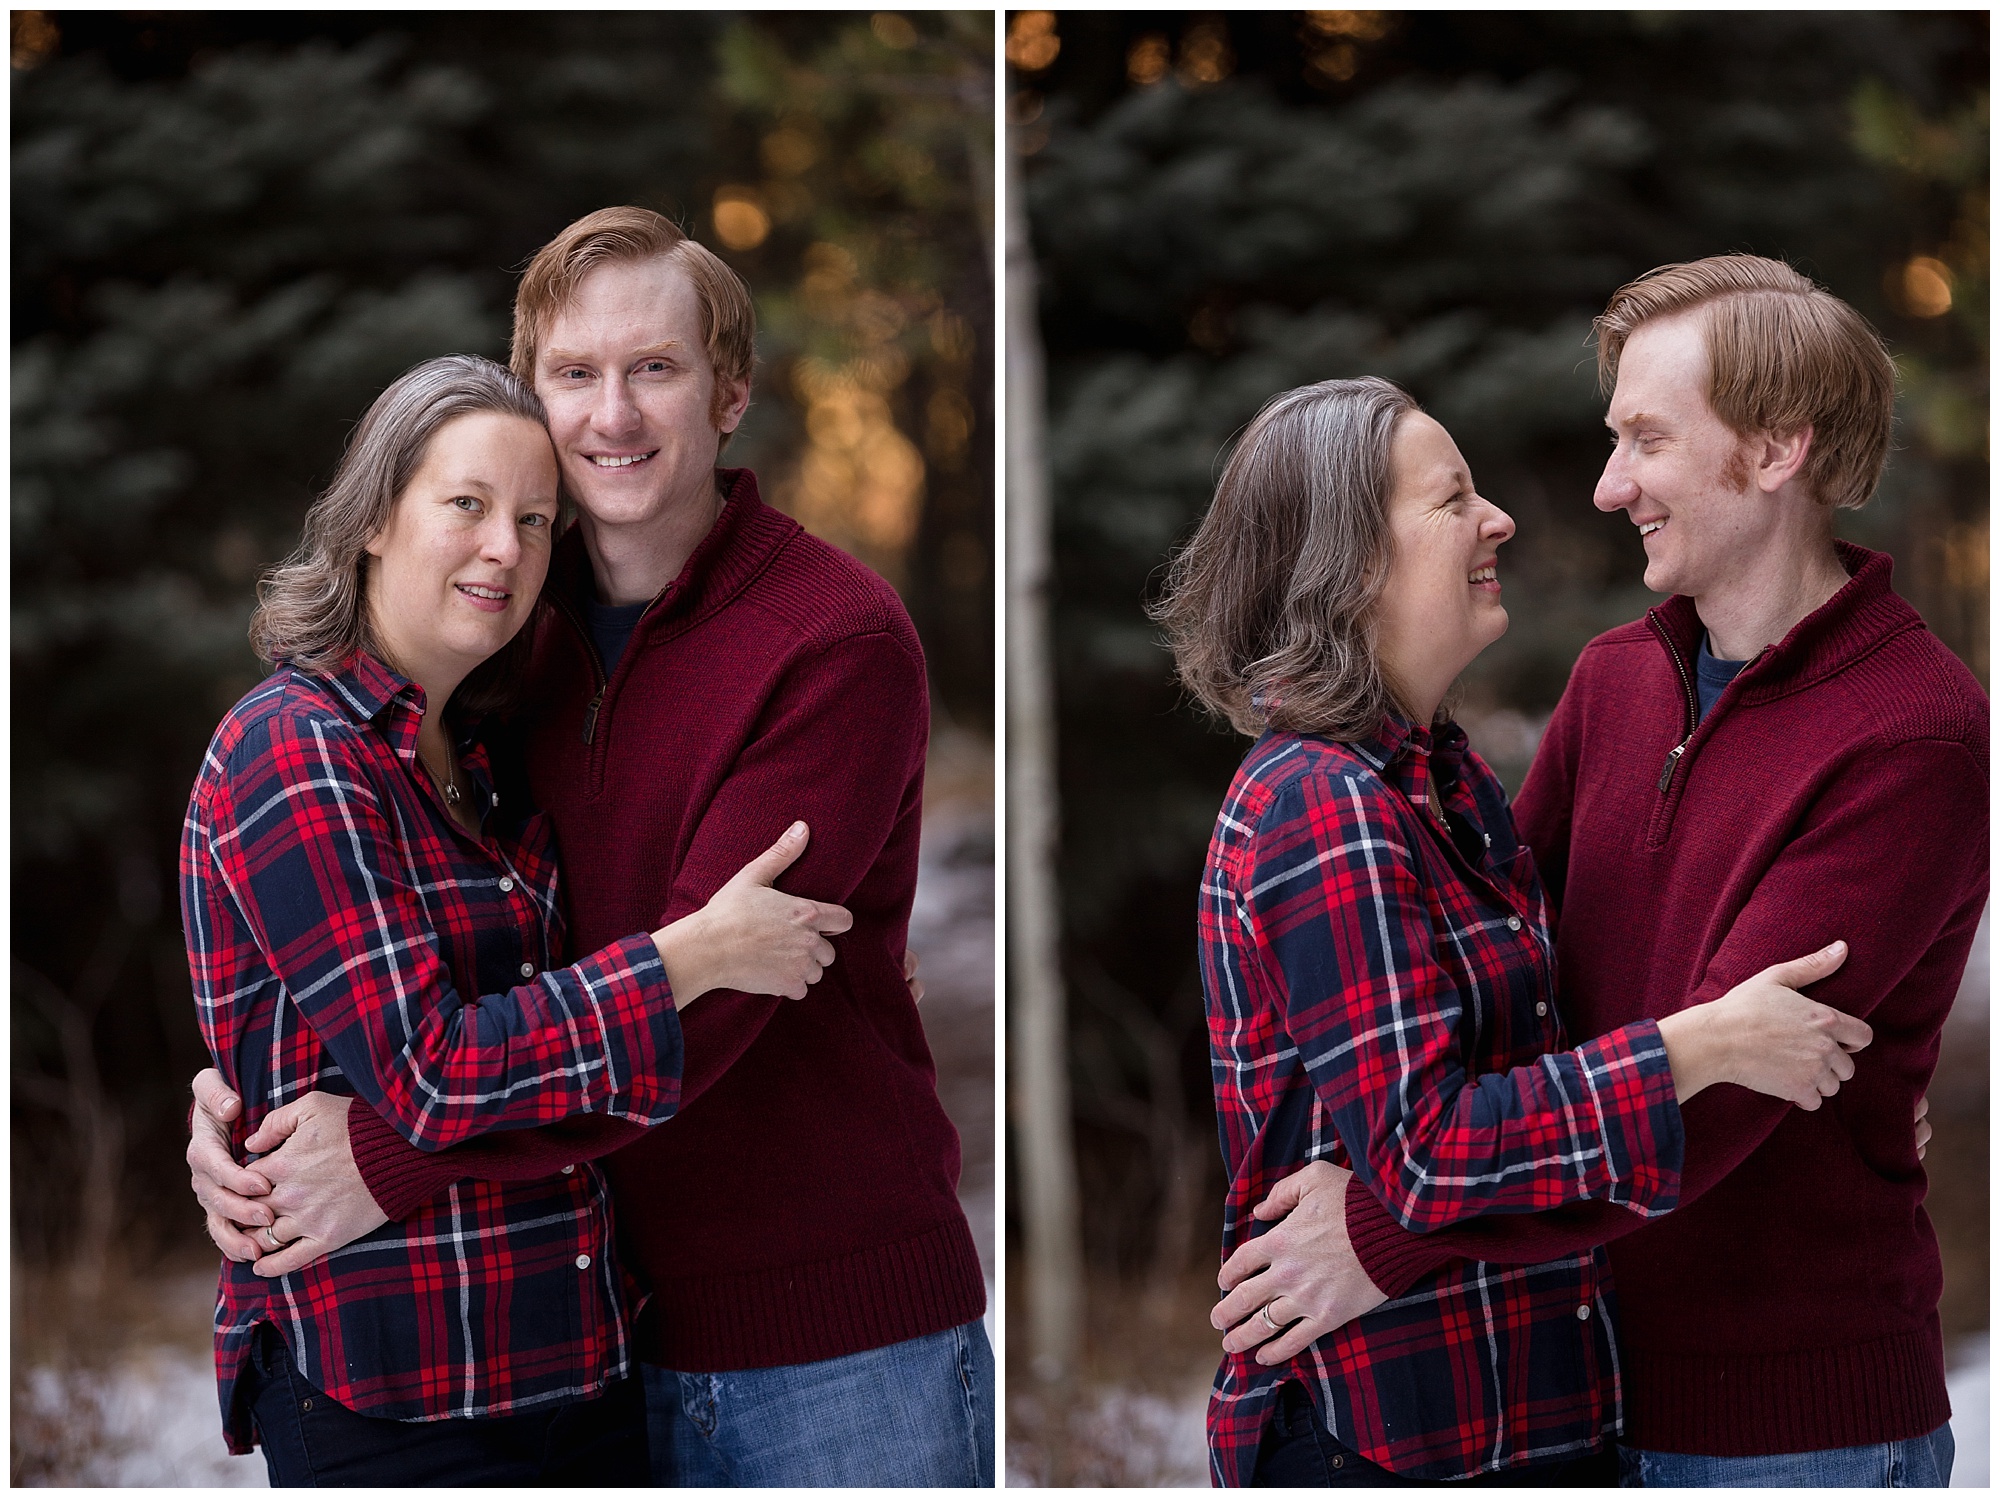 During their Colorado family photo shoot, the happy parents hug each other close.